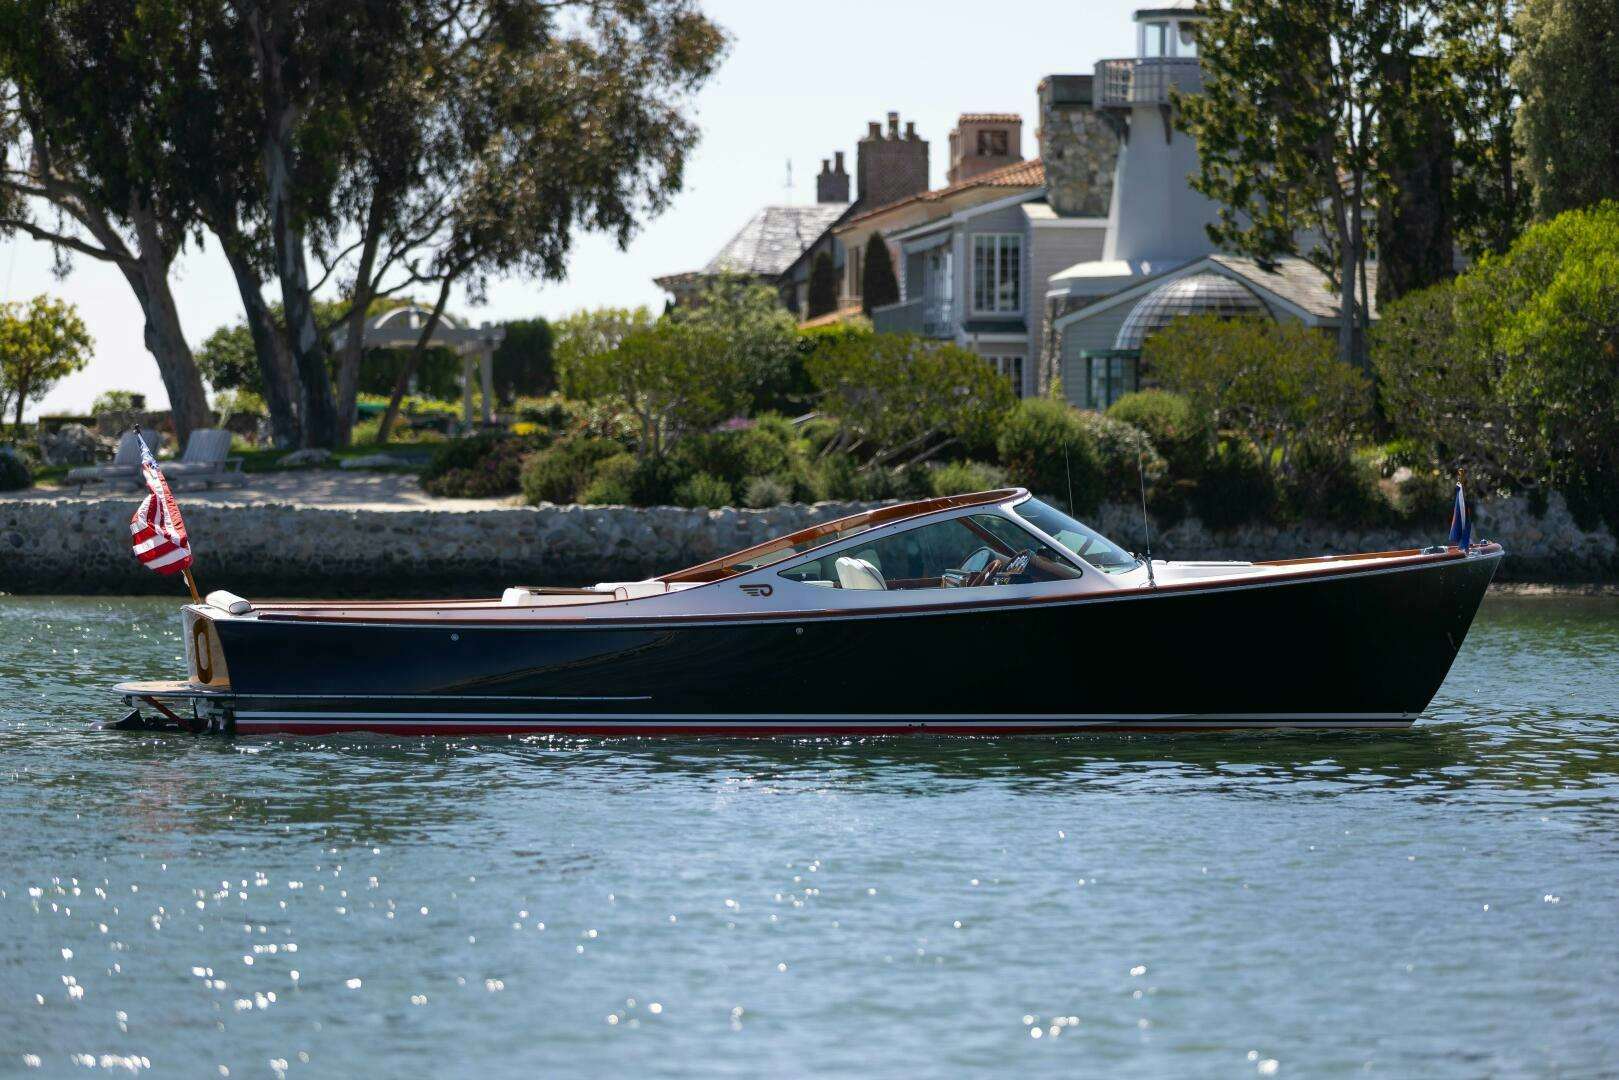 Whiskey girl
Yacht for Sale